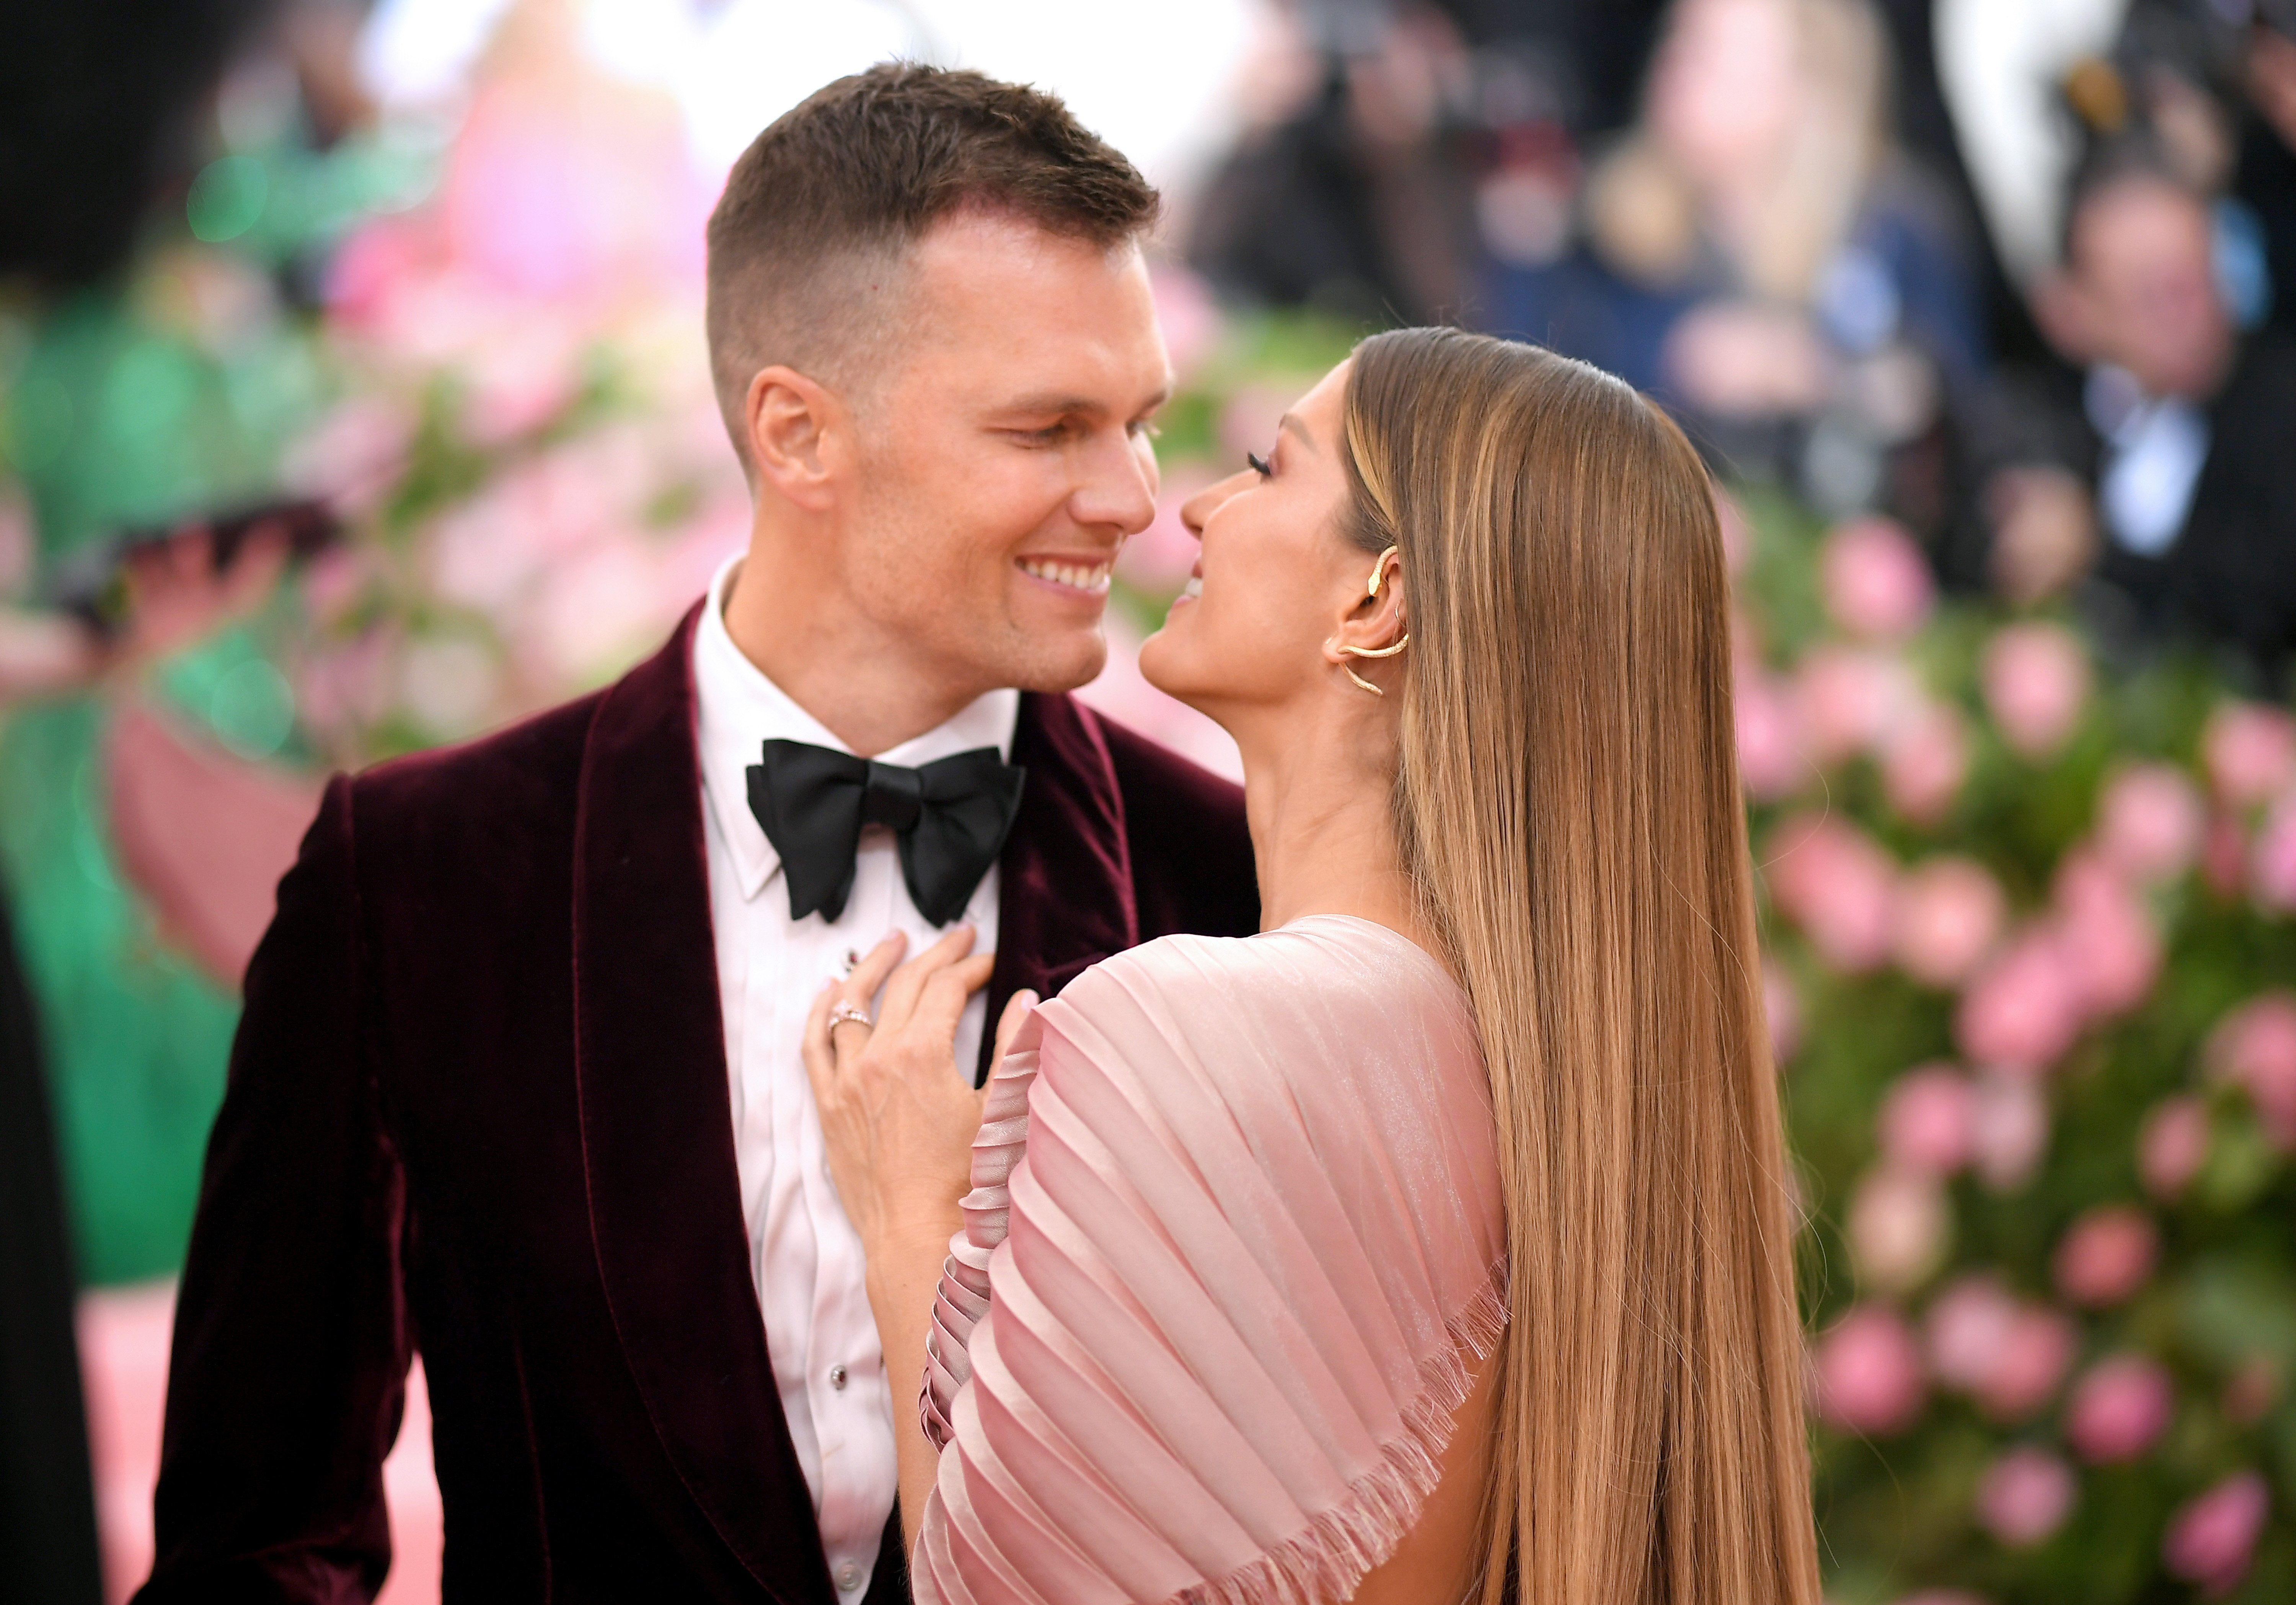 Gisele Bündchen and Tom Brady attend the 2019 Met Gala | Photo: Getty Images